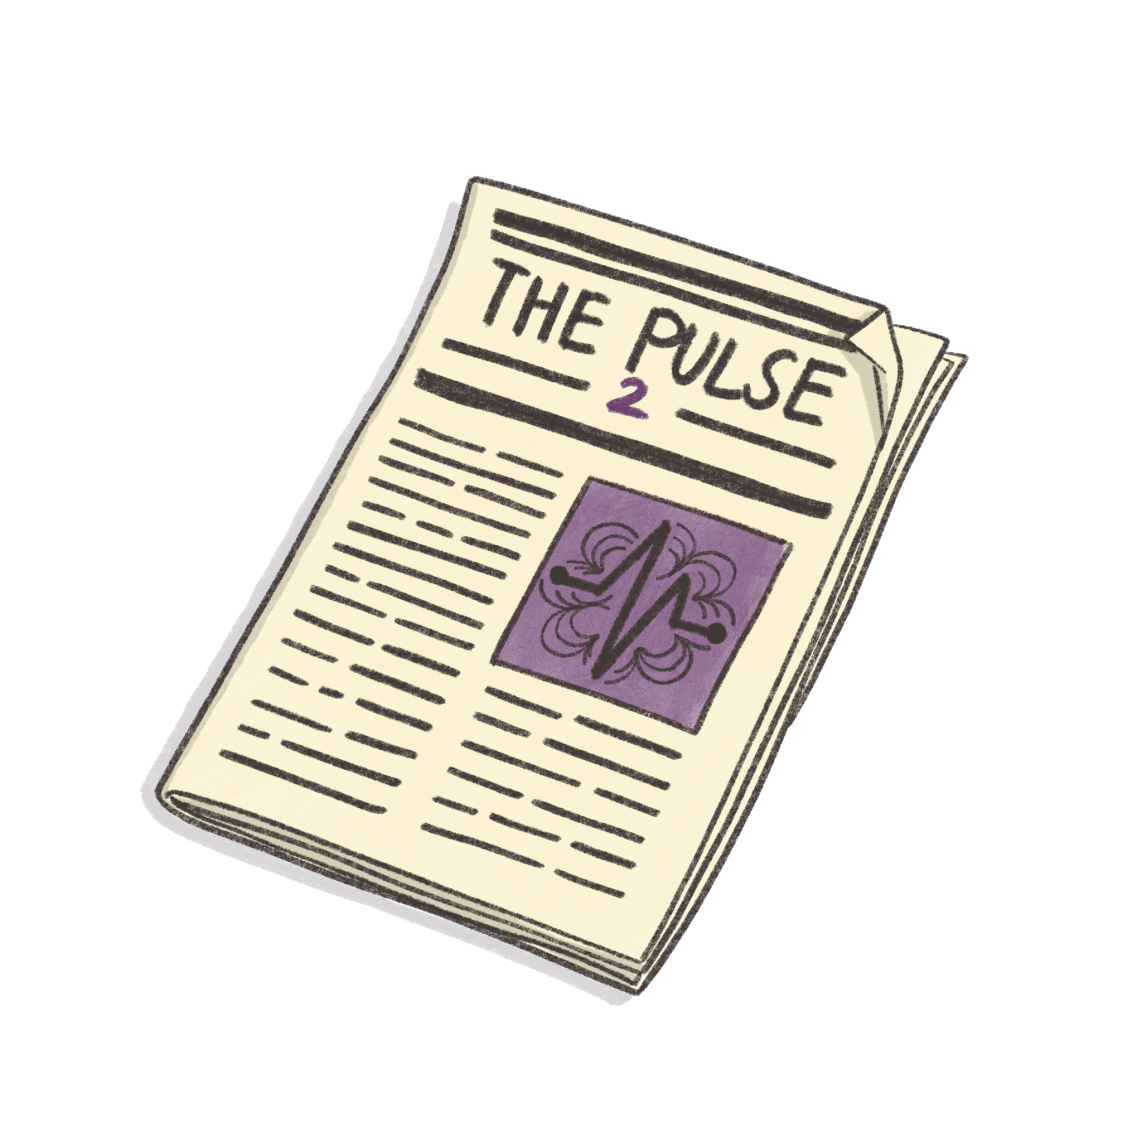 The Apoio Pulse – Issue Two